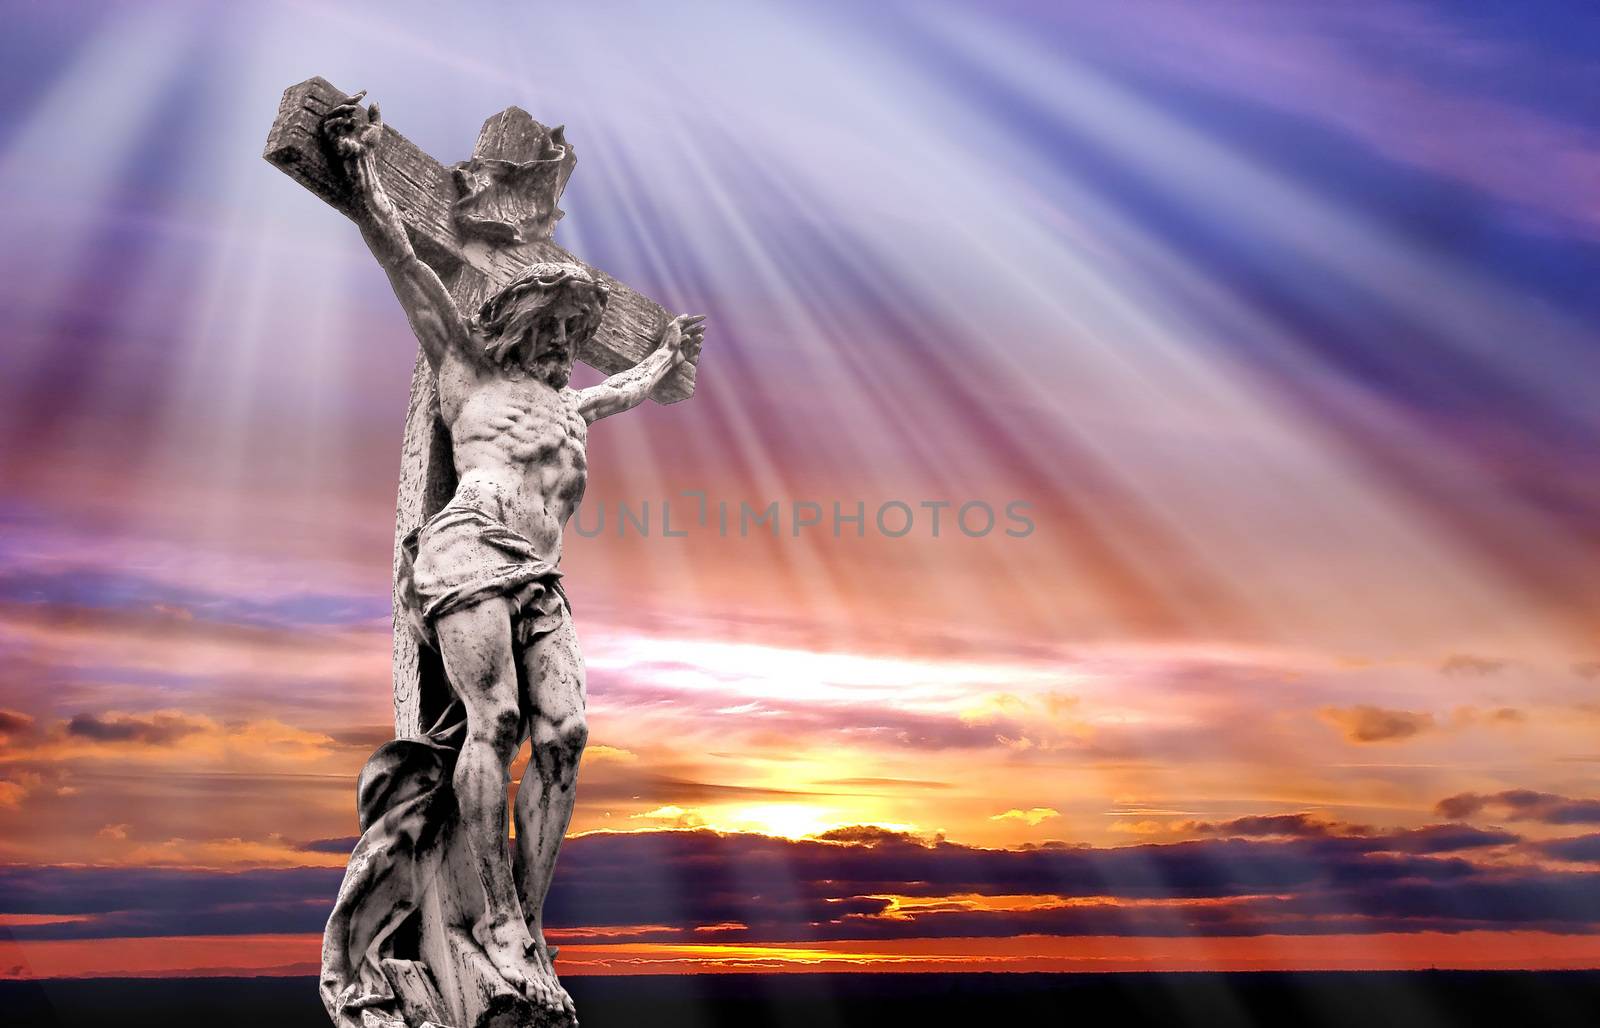 sunset with statue of crucified Jesus Christ by fotosergio